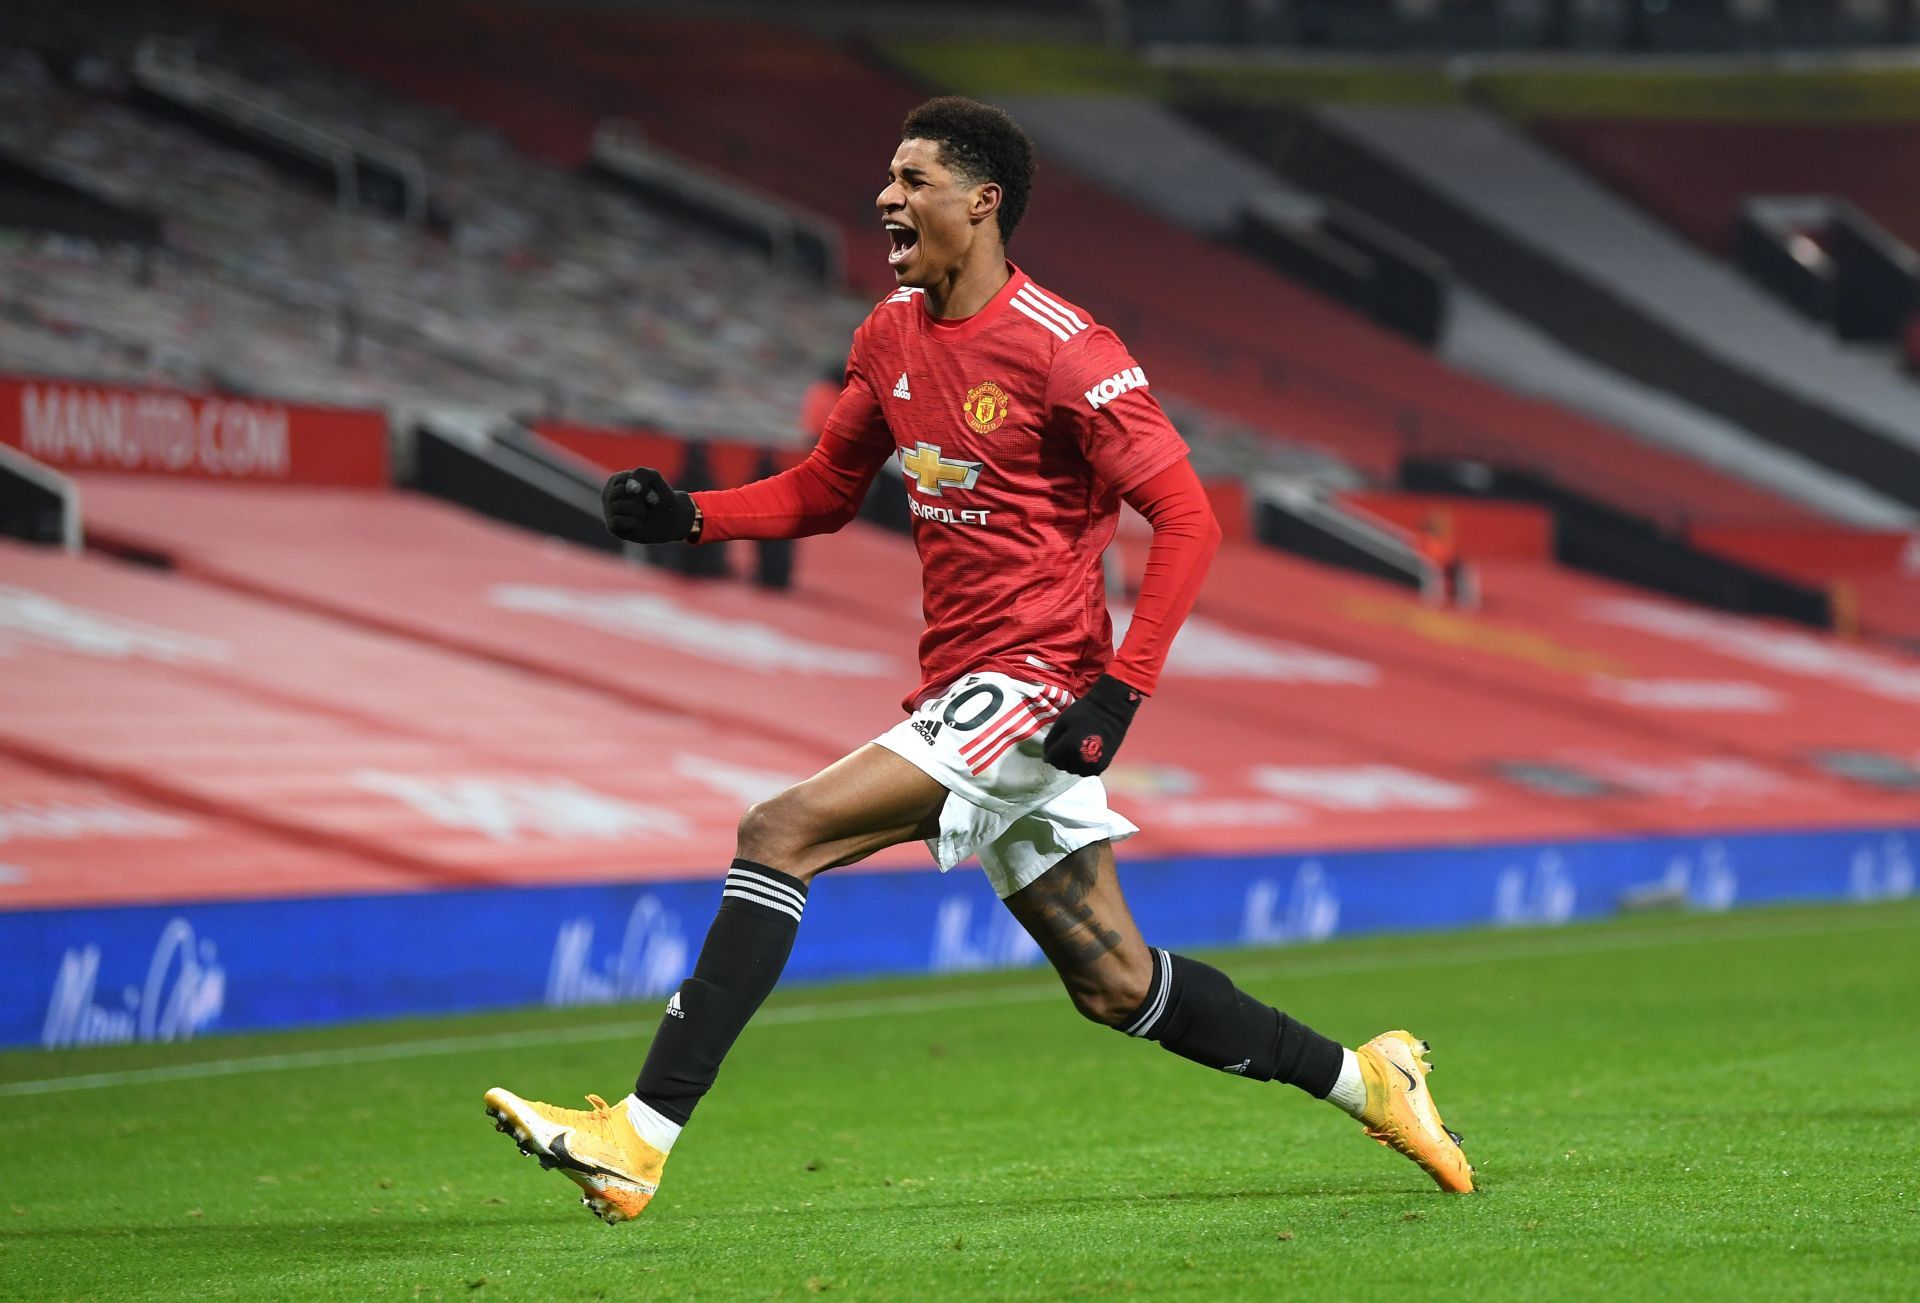 Marcus Rashford needs to be more amongst goals for Manchester United